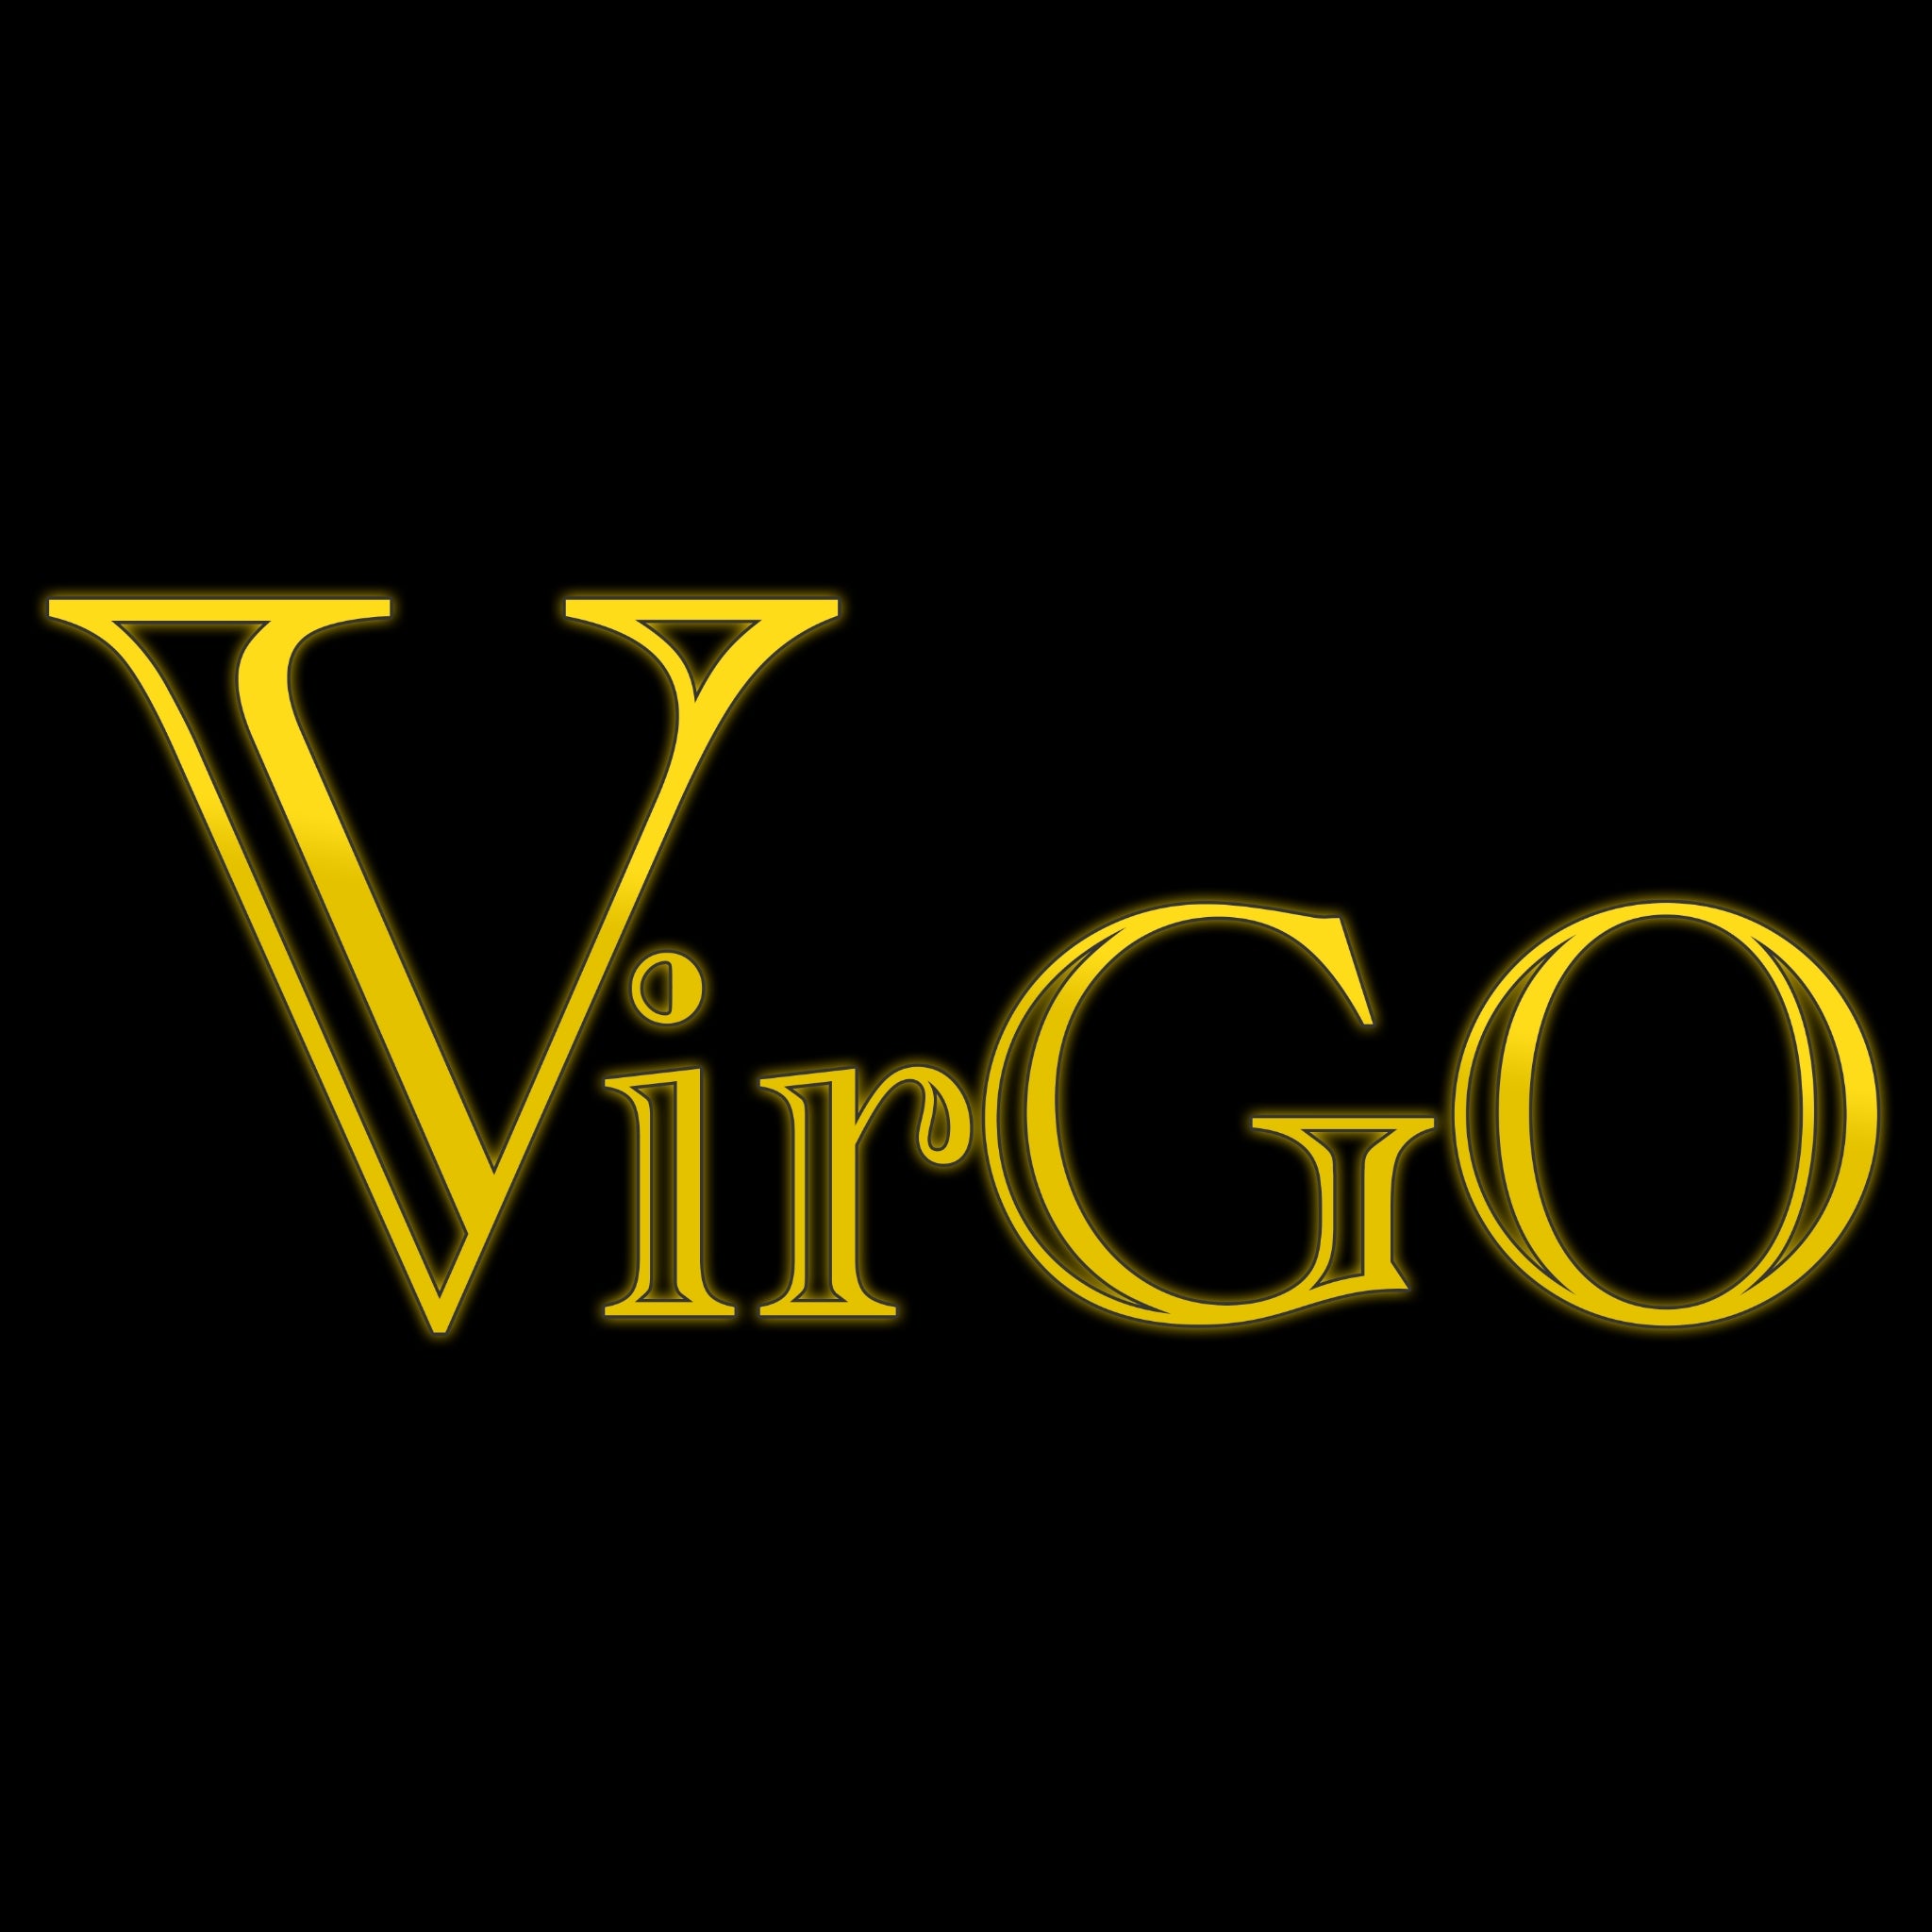 "VirGO" in gold text against a clean black background